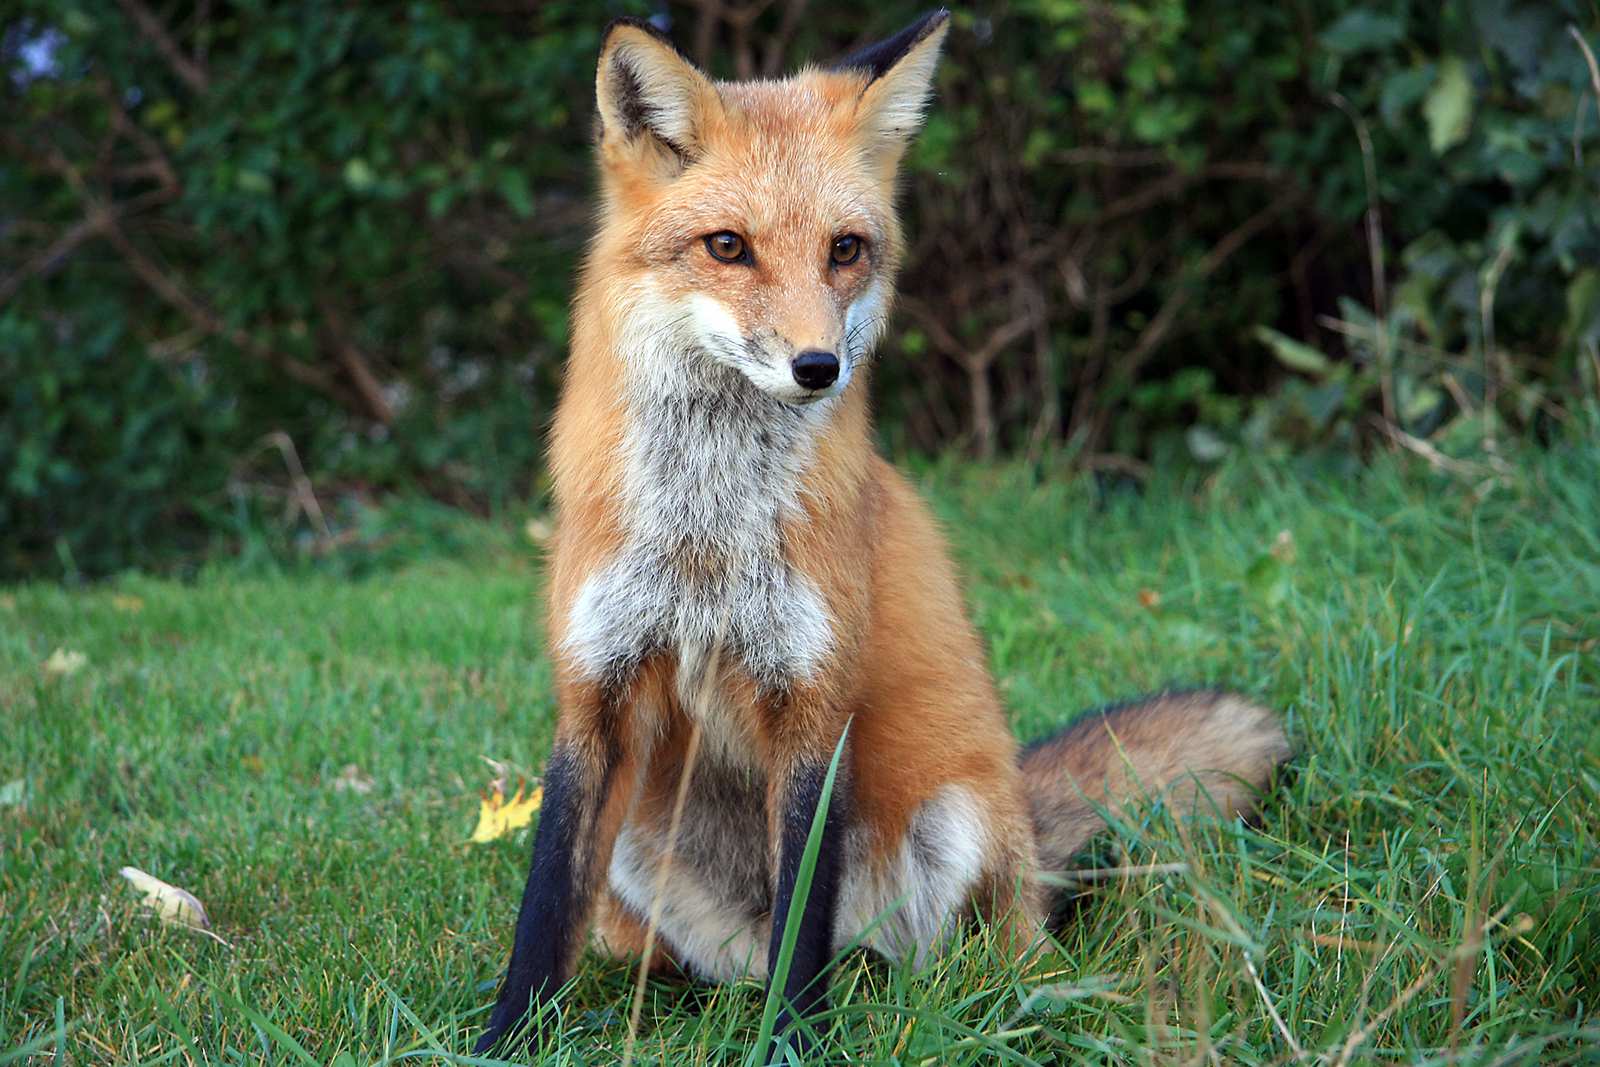 Maryland residents warned of rabies risk after infected fox is found dead